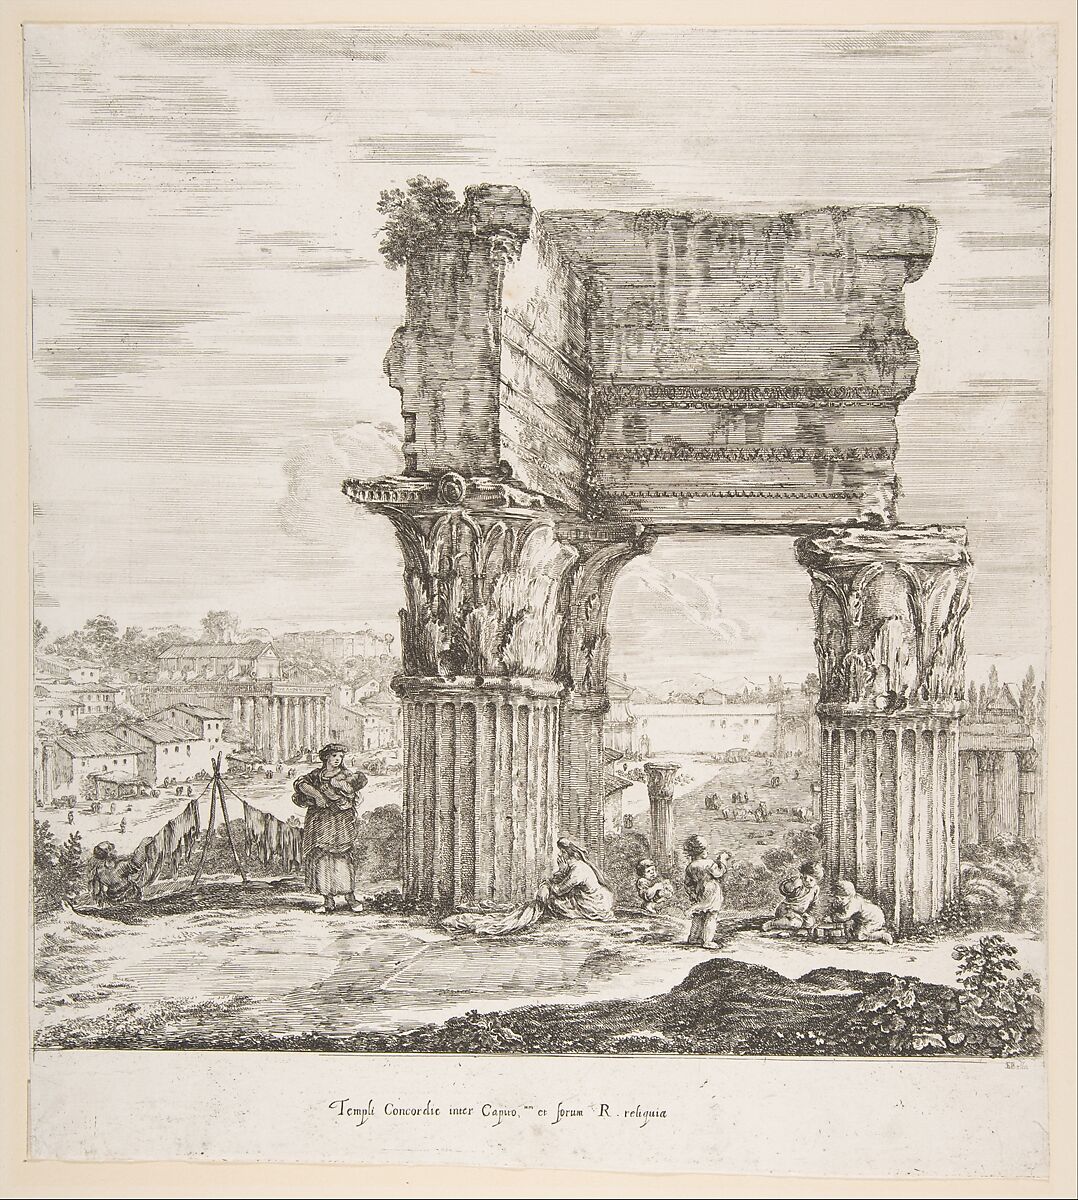 The Temple of Vespasian and the Roman Forum, from "Six large views, four of Rome, and two of the Roman countryside" (Six grandes vues, dont quatre de Rome et deux de la Campagne romaine), Stefano della Bella  Italian, Etching; second state of two